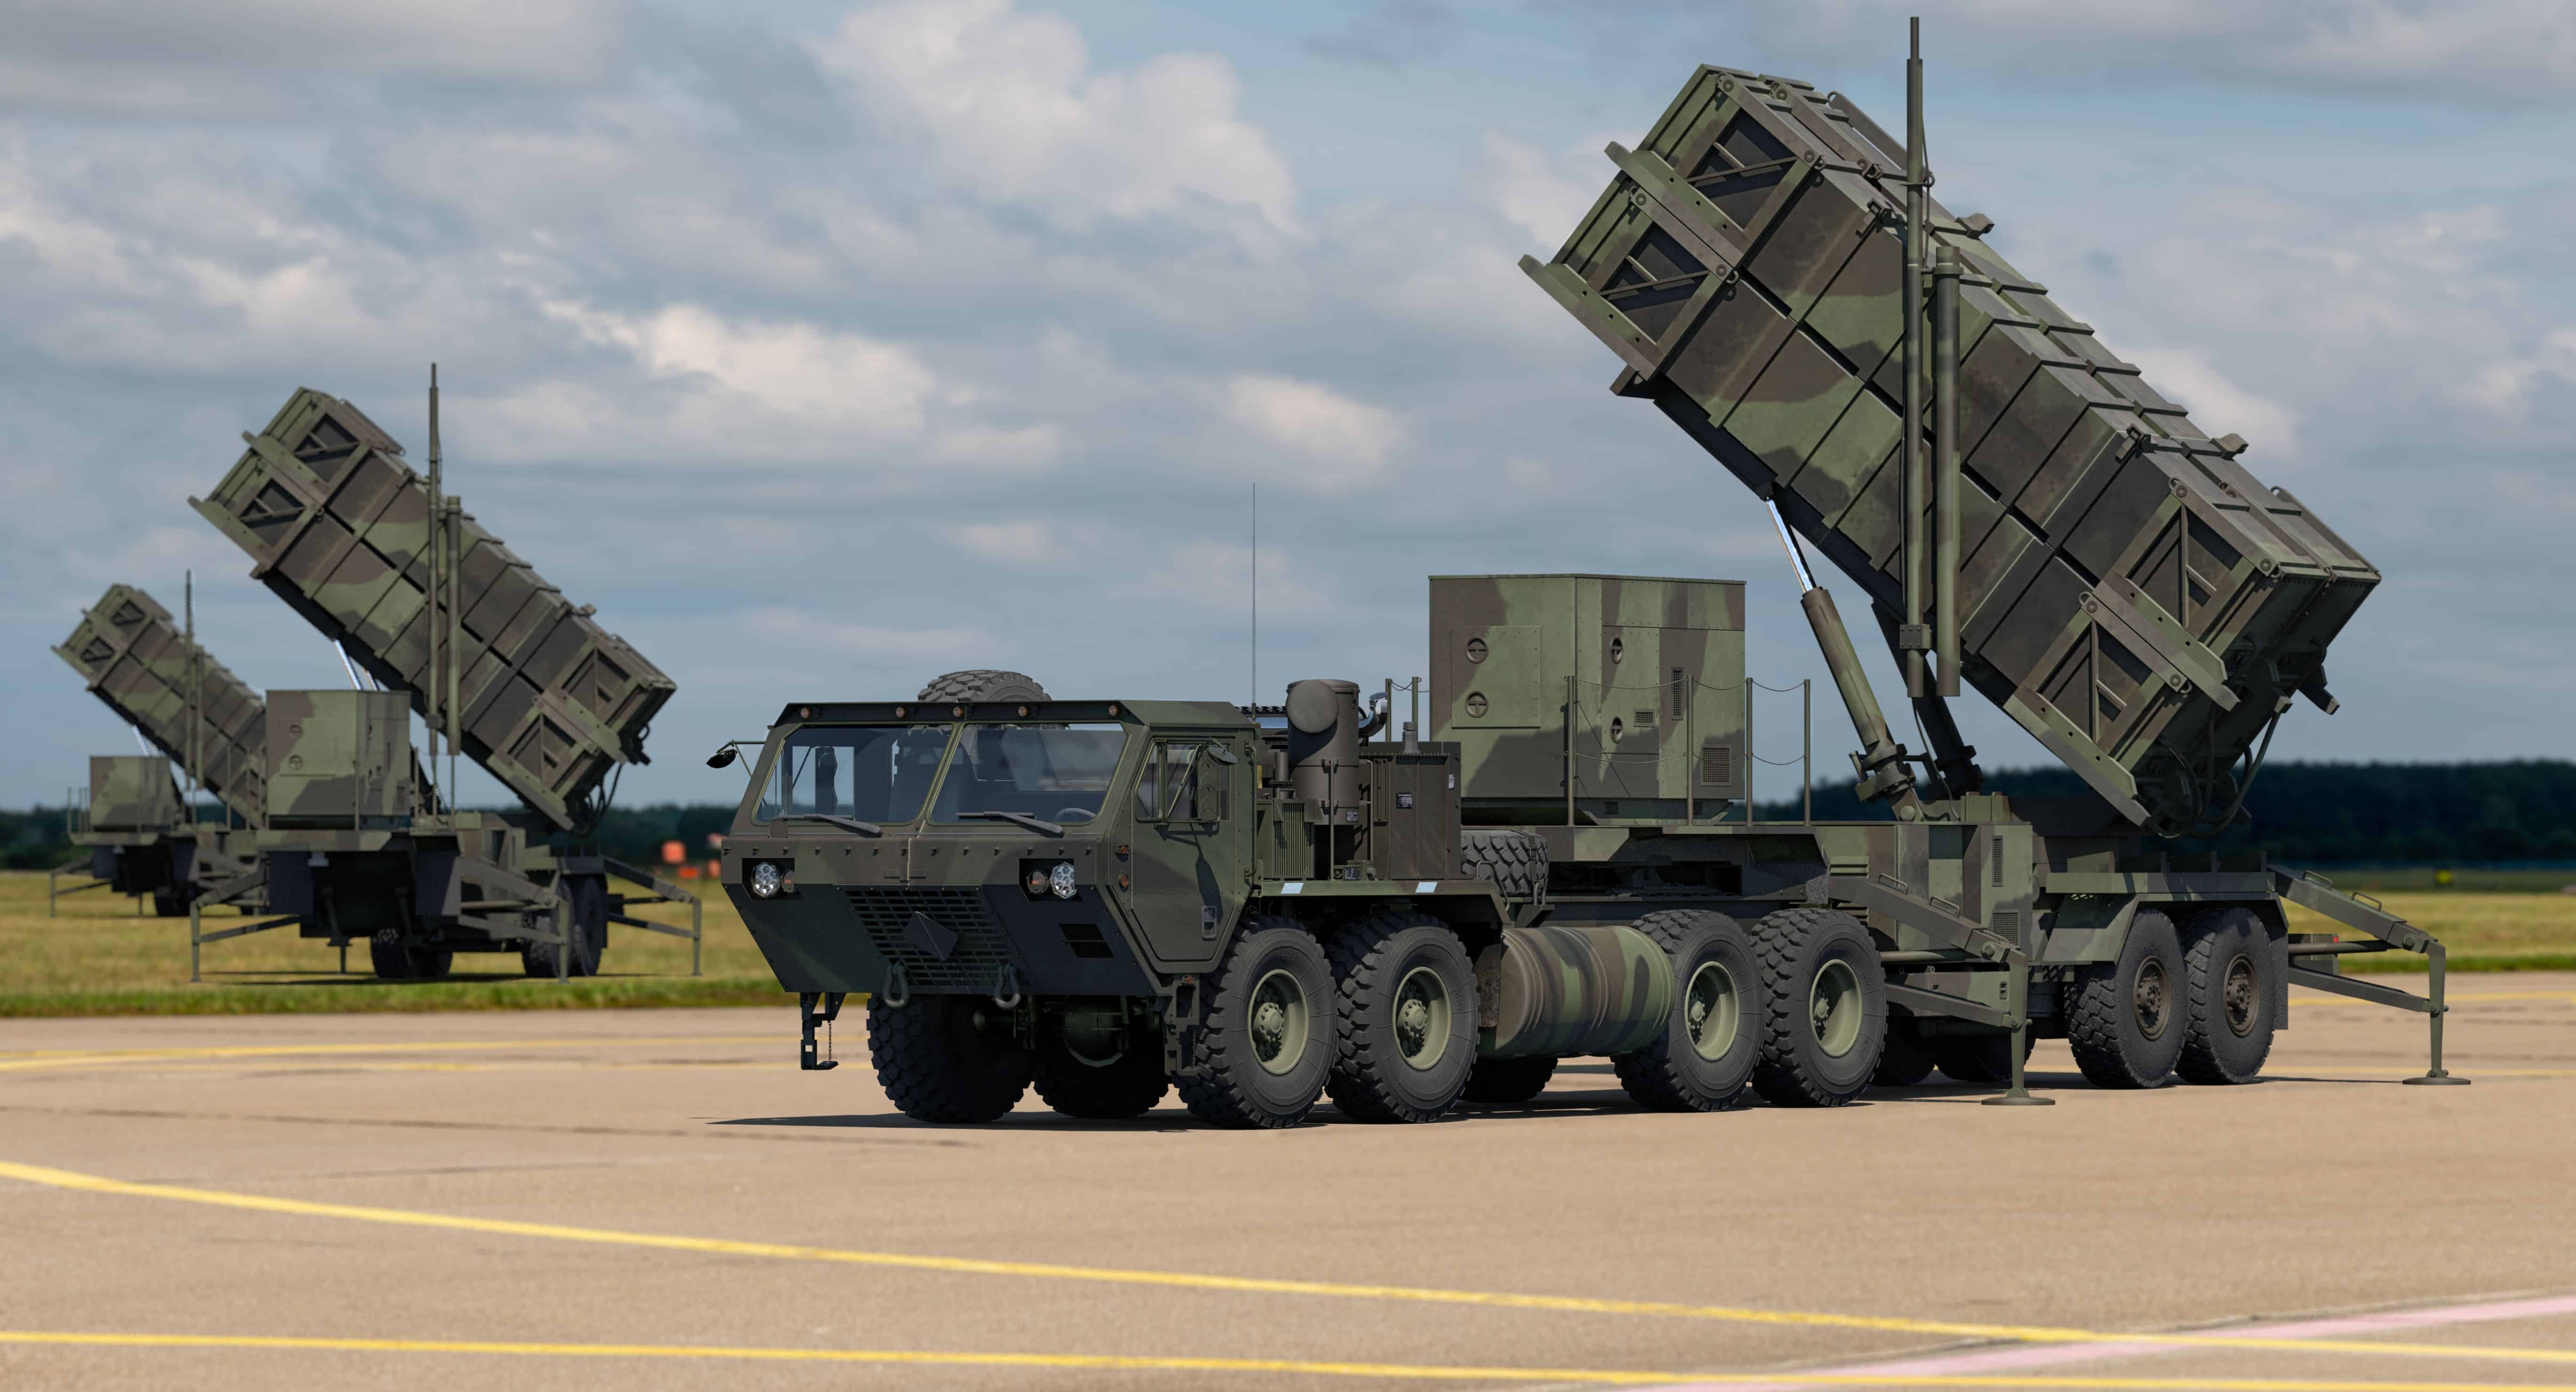 Szczecin,Poland-July 2022:MIM-104 Patriot - American surface-to-air missile system developed by Raytheon to protect strategic targets